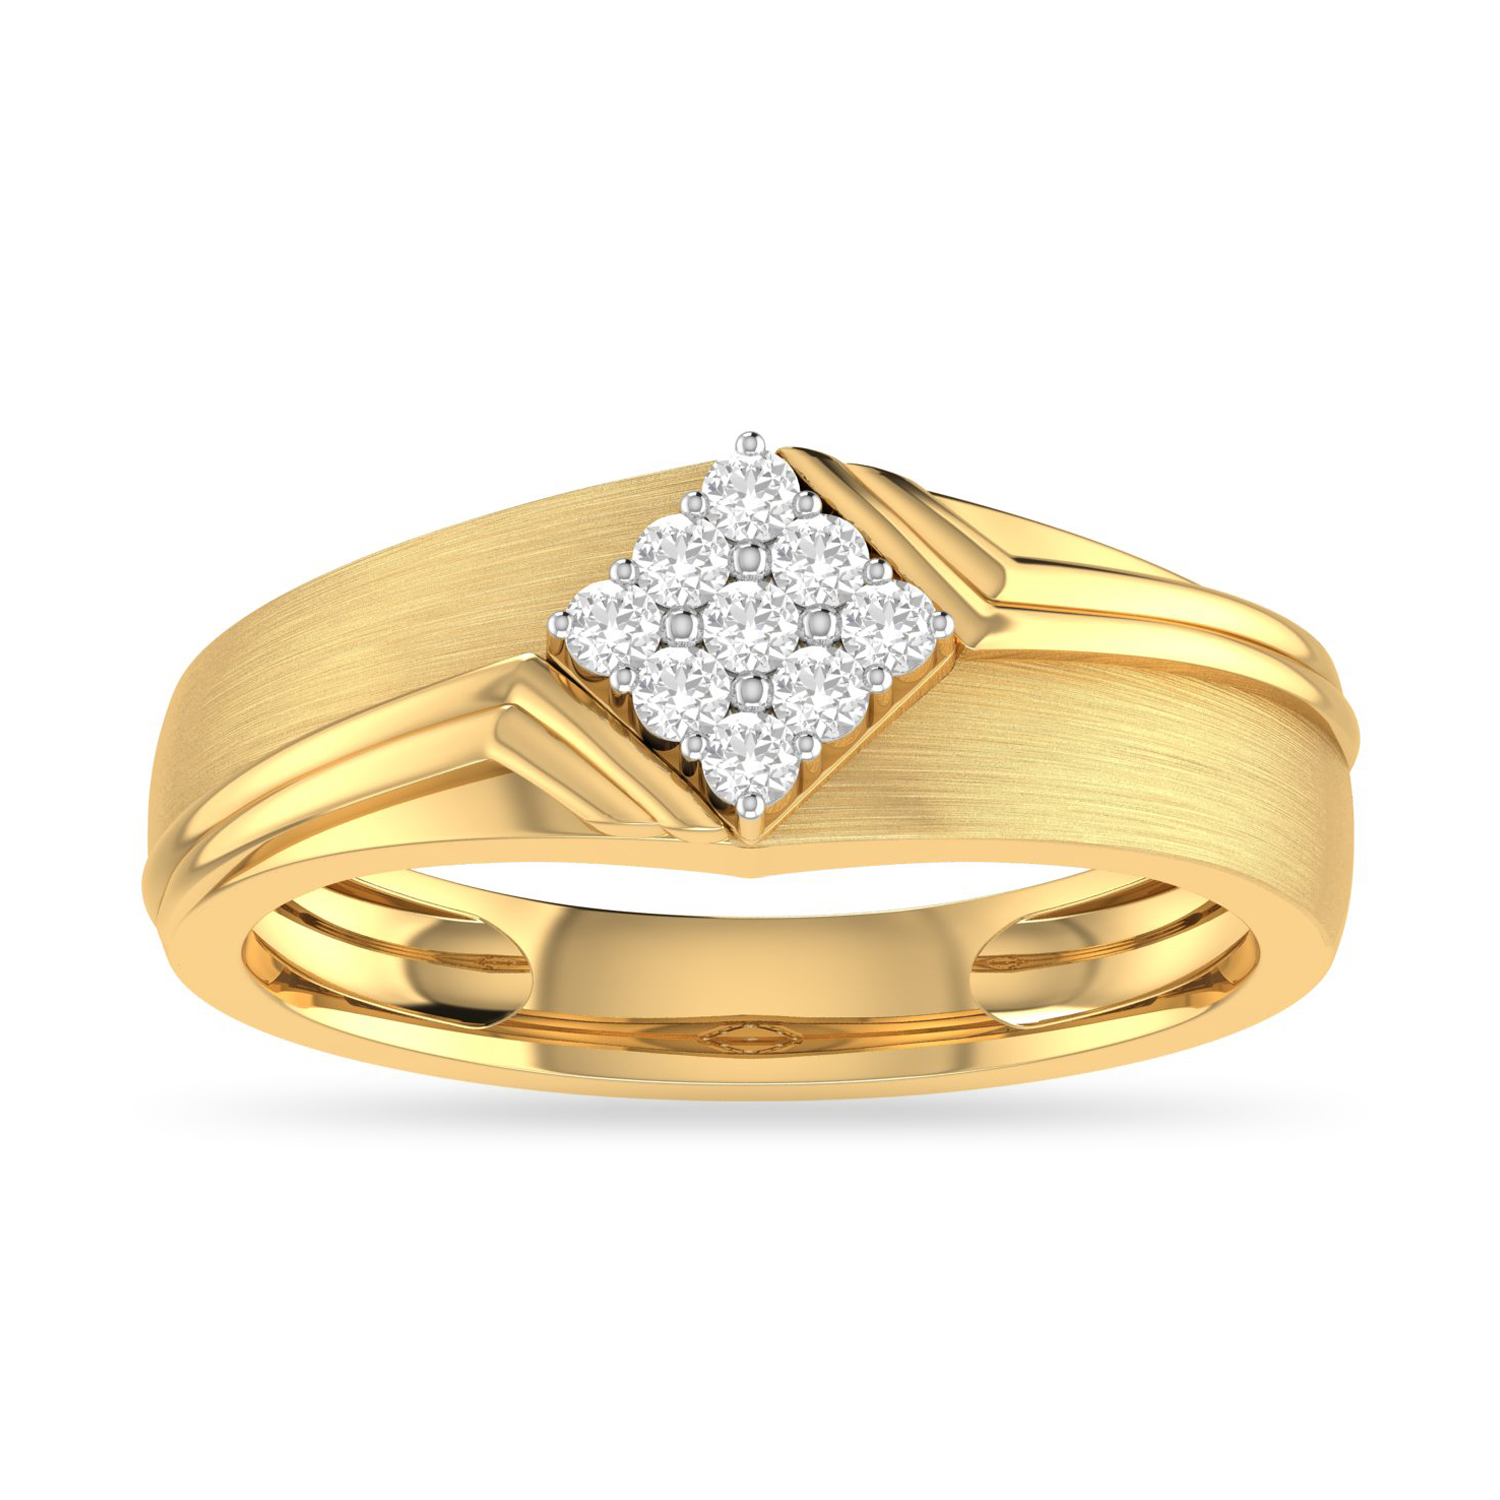 ASEVAN AABI JEWELS GIE CERTIFIED NEW DESIGN  DIAMOND RING FOR MA